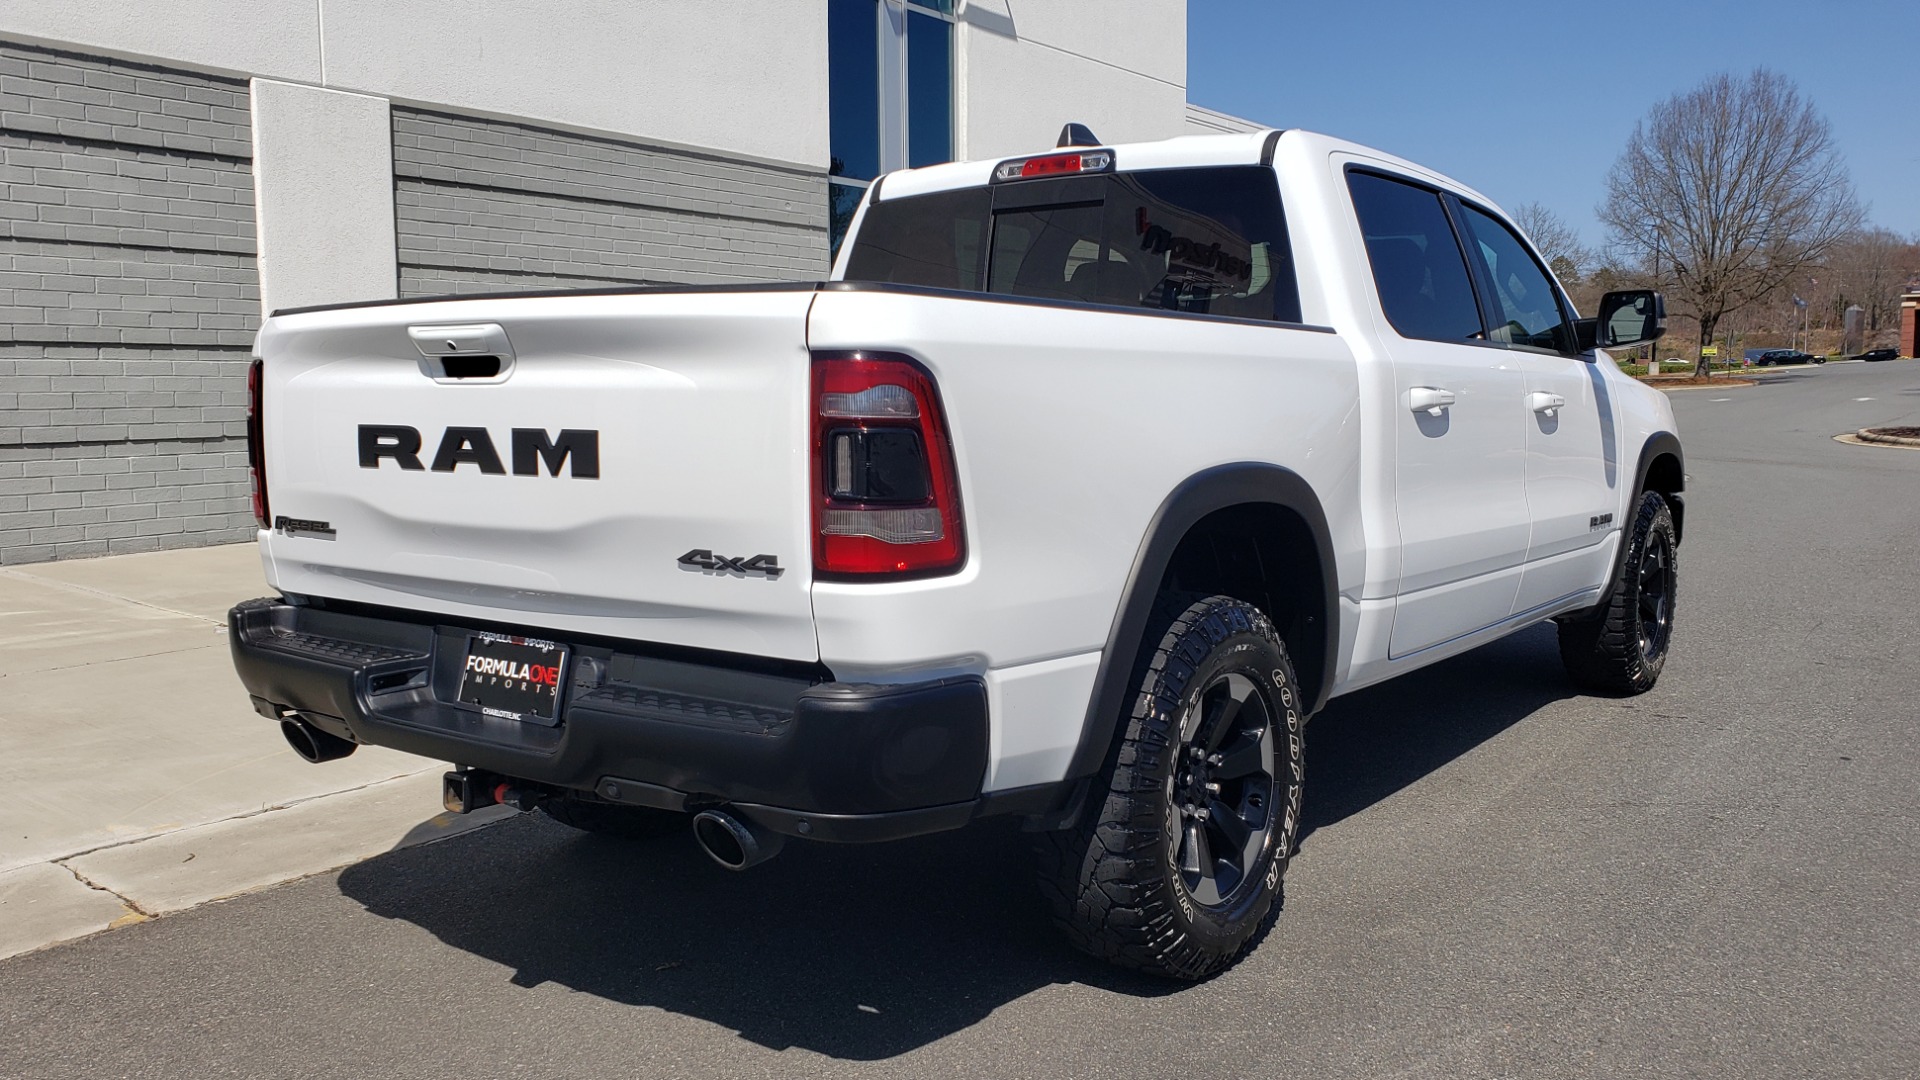 Used 2019 Ram 1500 REBEL CREWCAB 4X4 / 5.7L V8 HEMI / 8-SPD AUTO / REARVIEW for sale Sold at Formula Imports in Charlotte NC 28227 8